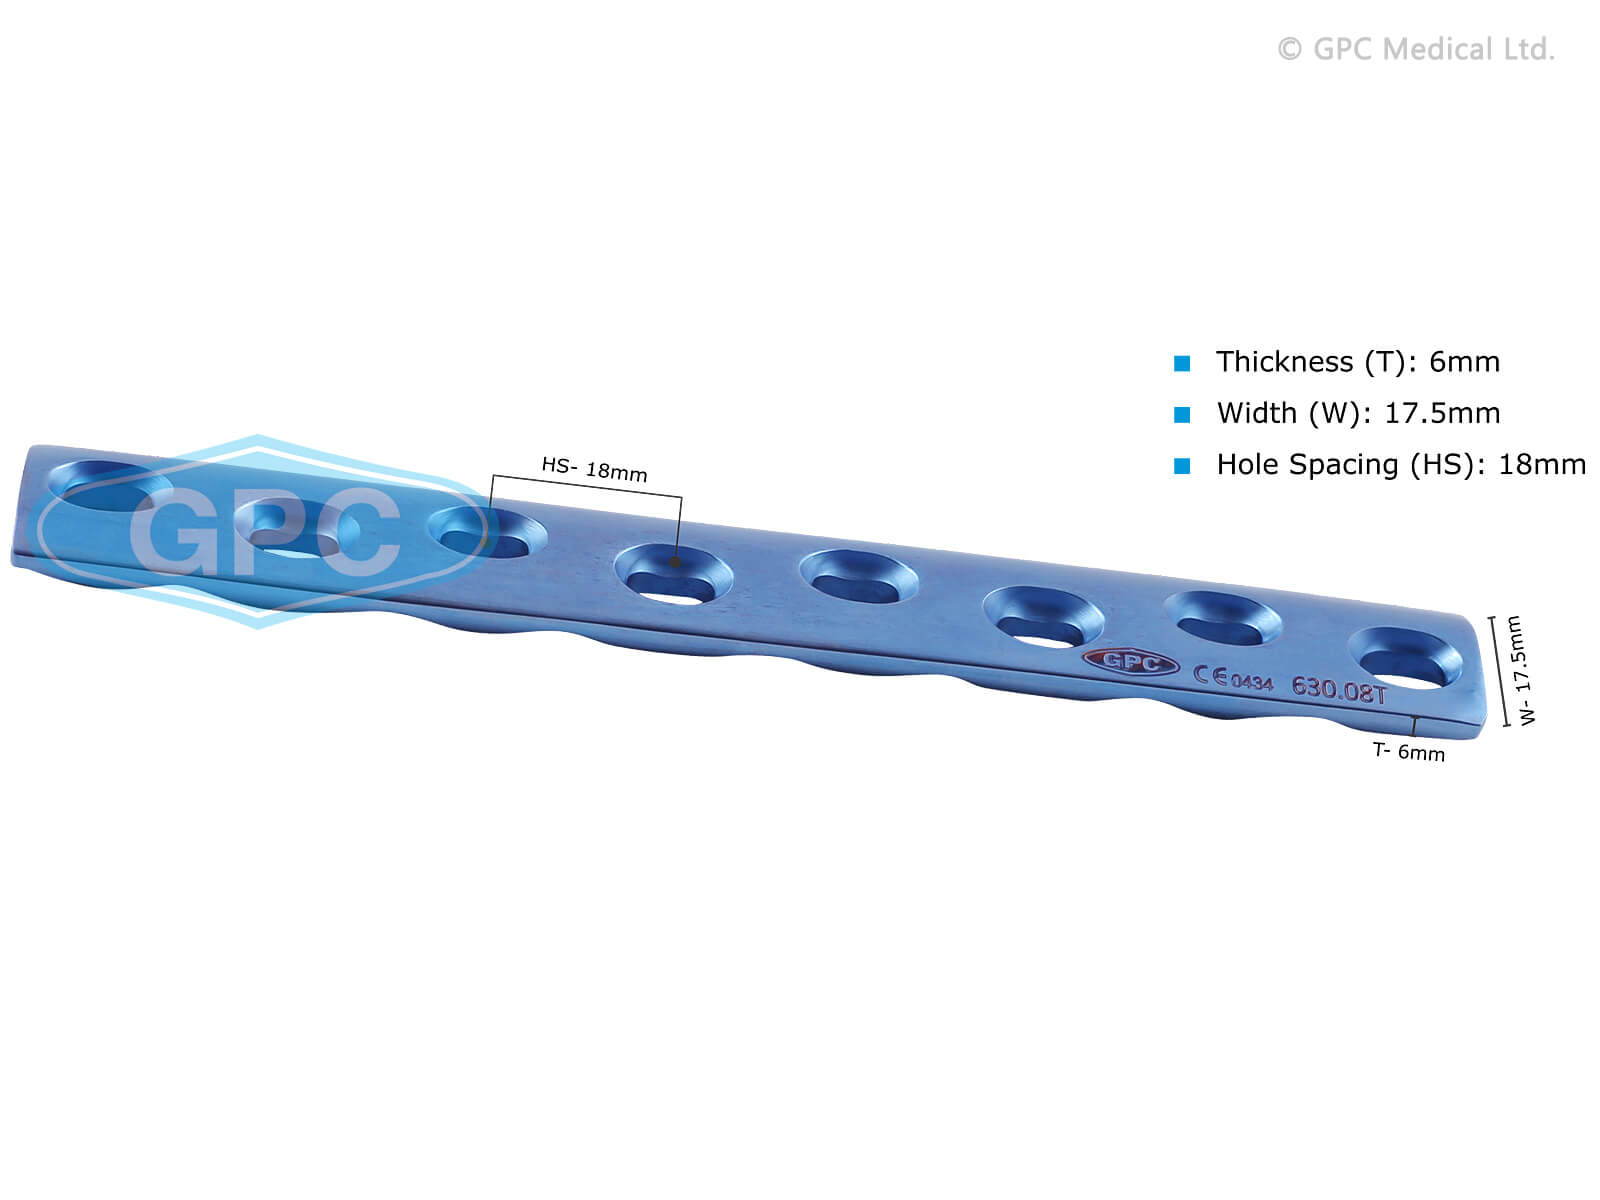 https://www.gpcmedicalusa.com/product_large_image-webp/Limited-Contact-Dynamic-Compression-Plate-LC-DCP-Broad-630.webp